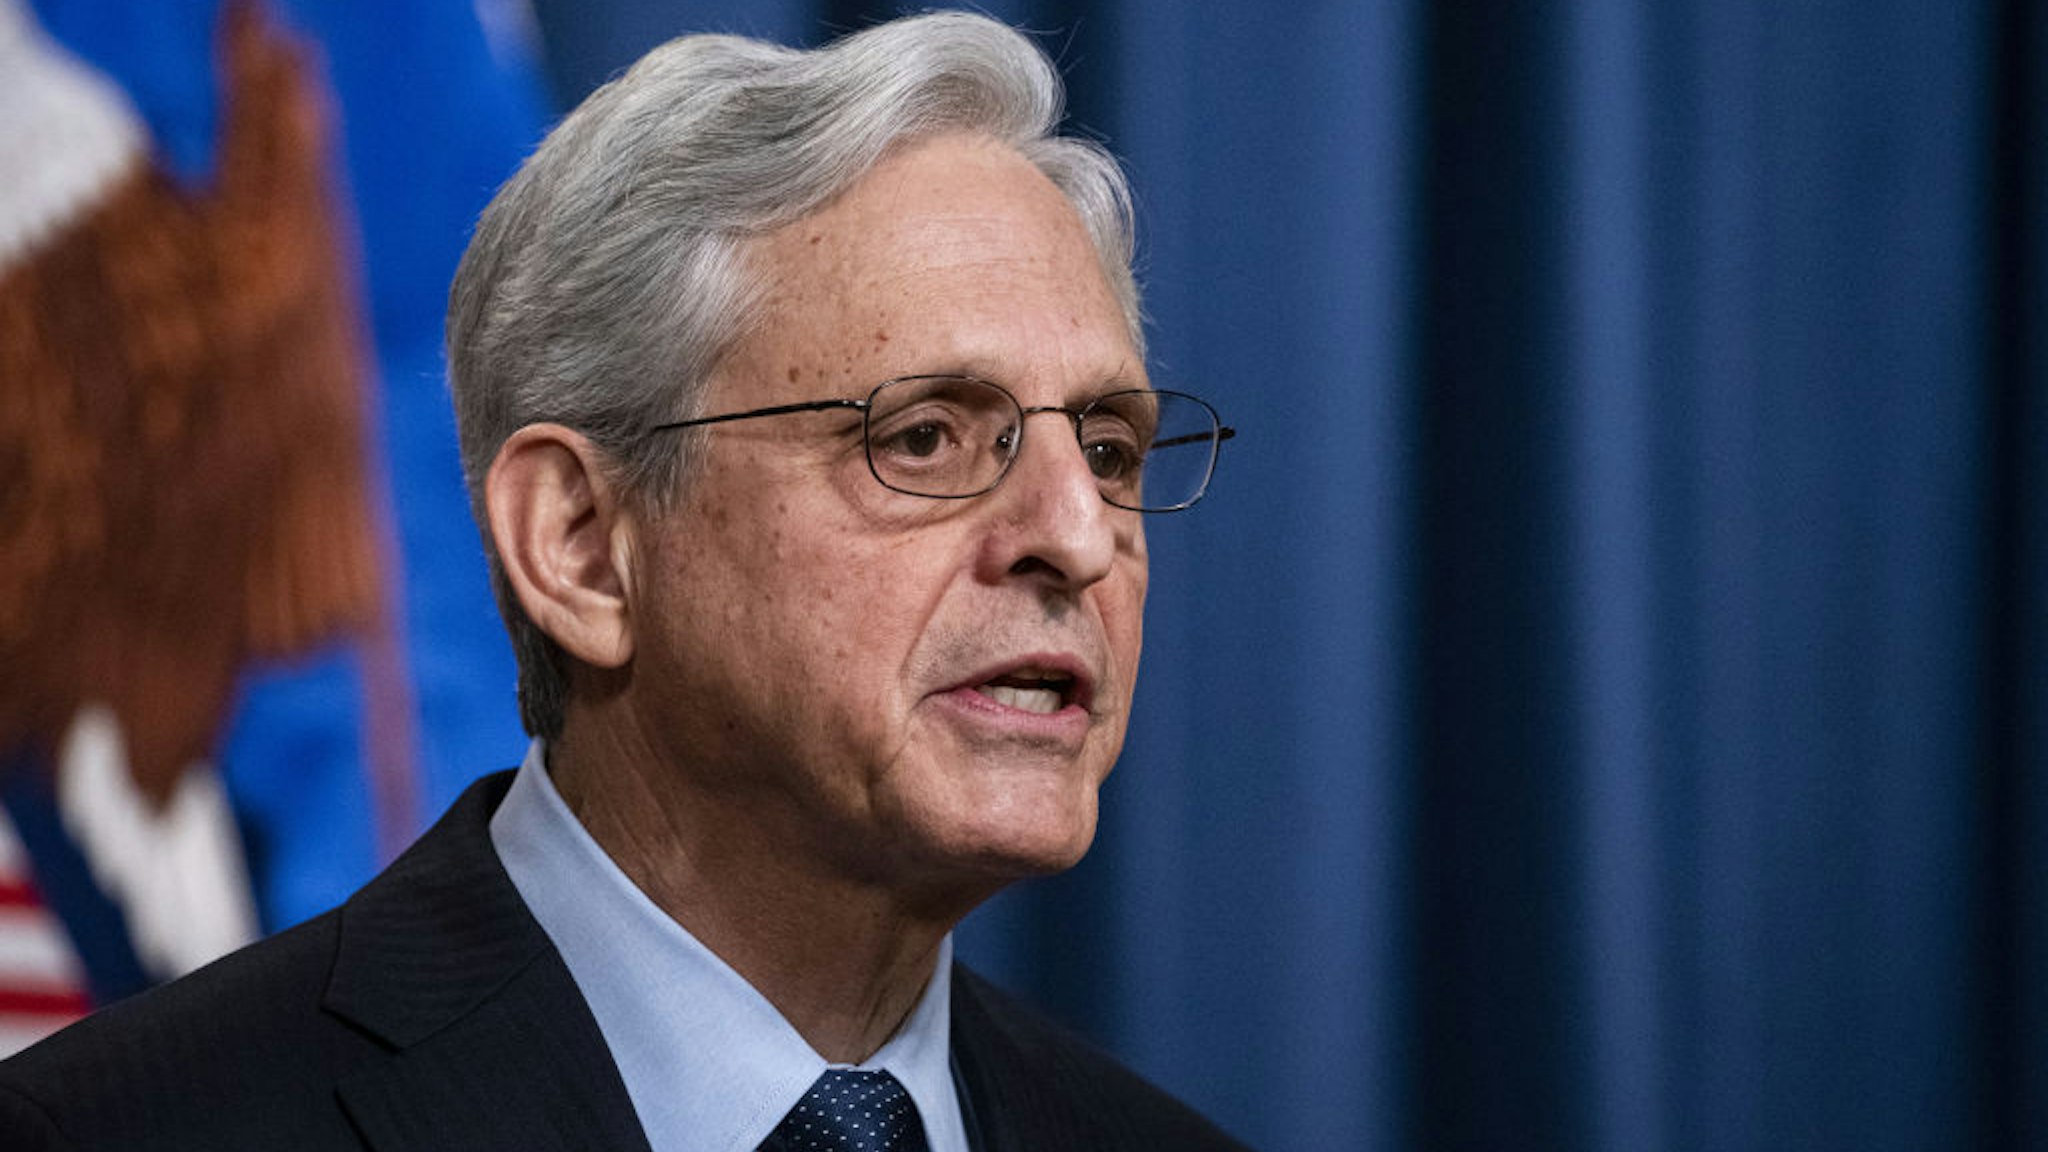 Merrick Garland, US attorney general, speaks at the Department of Justice in Washington, DC, US, on Thursday, Jan. 12, 2023. Garland said he has appointed a special counsel to oversee the investigation of the documents matter associated with President Joe Biden from his time as vice president.